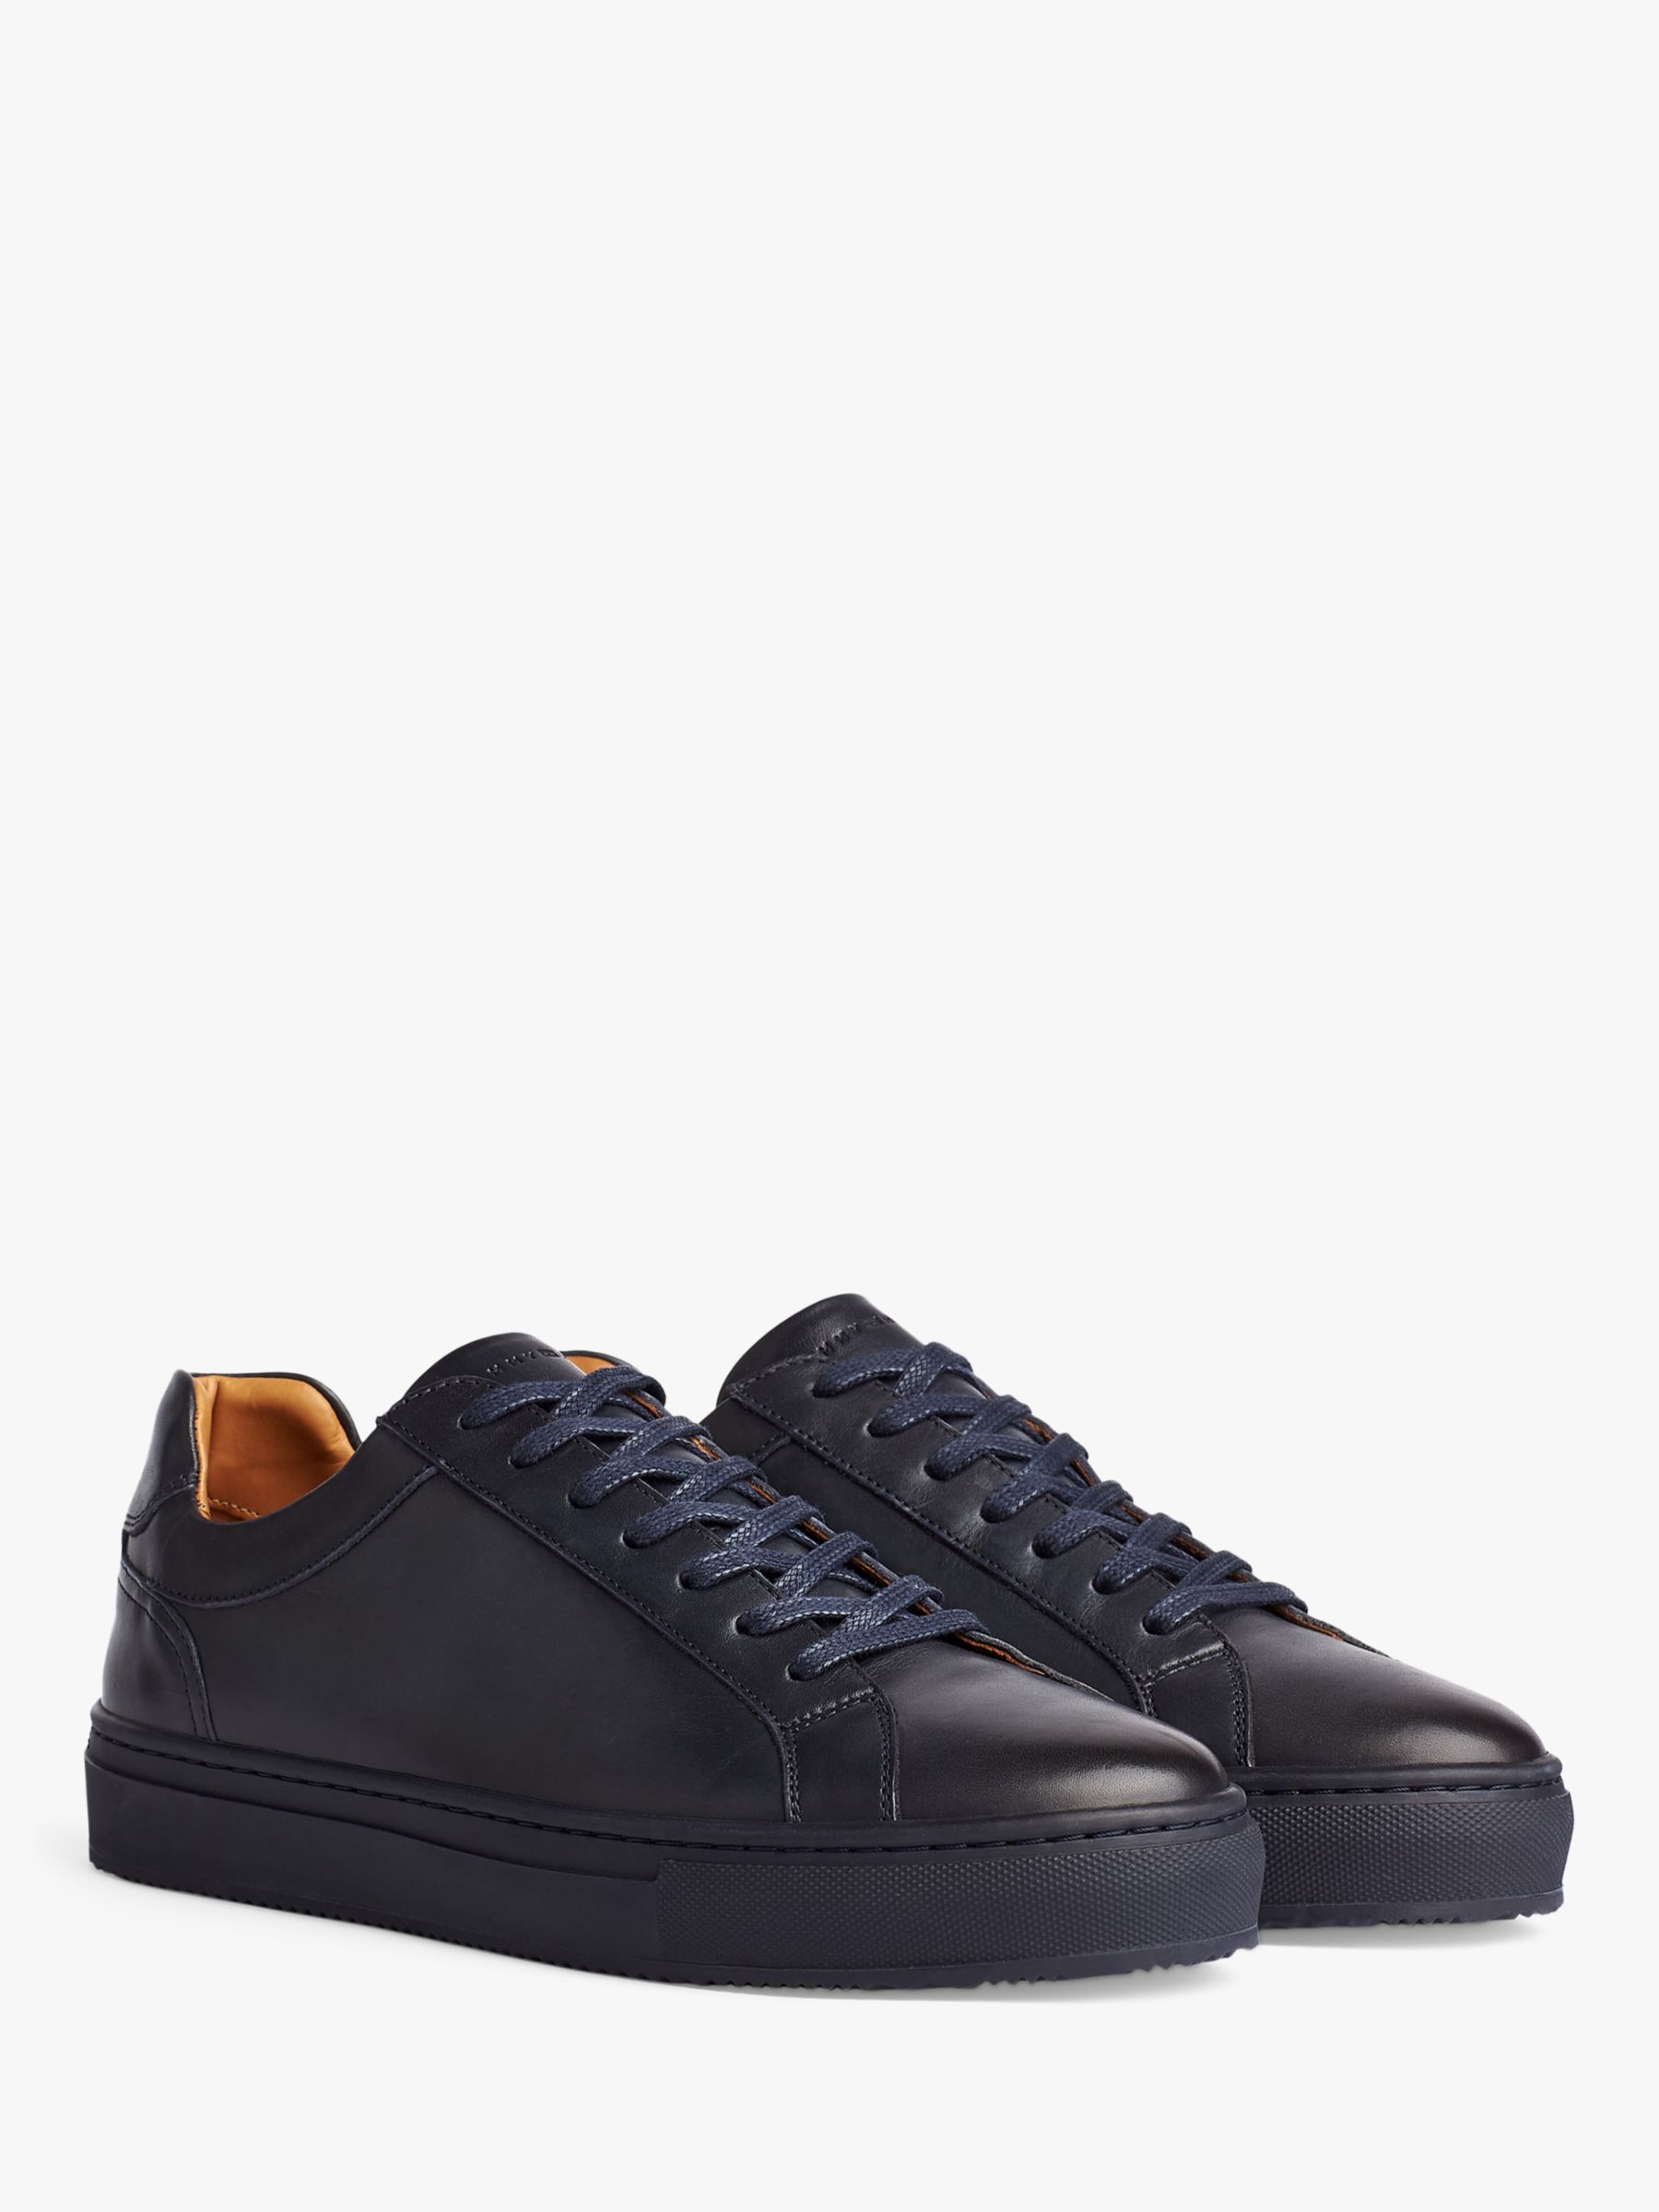 Tommy Hilfiger Premium Cupsole Trainers, Navy at John Lewis & Partners